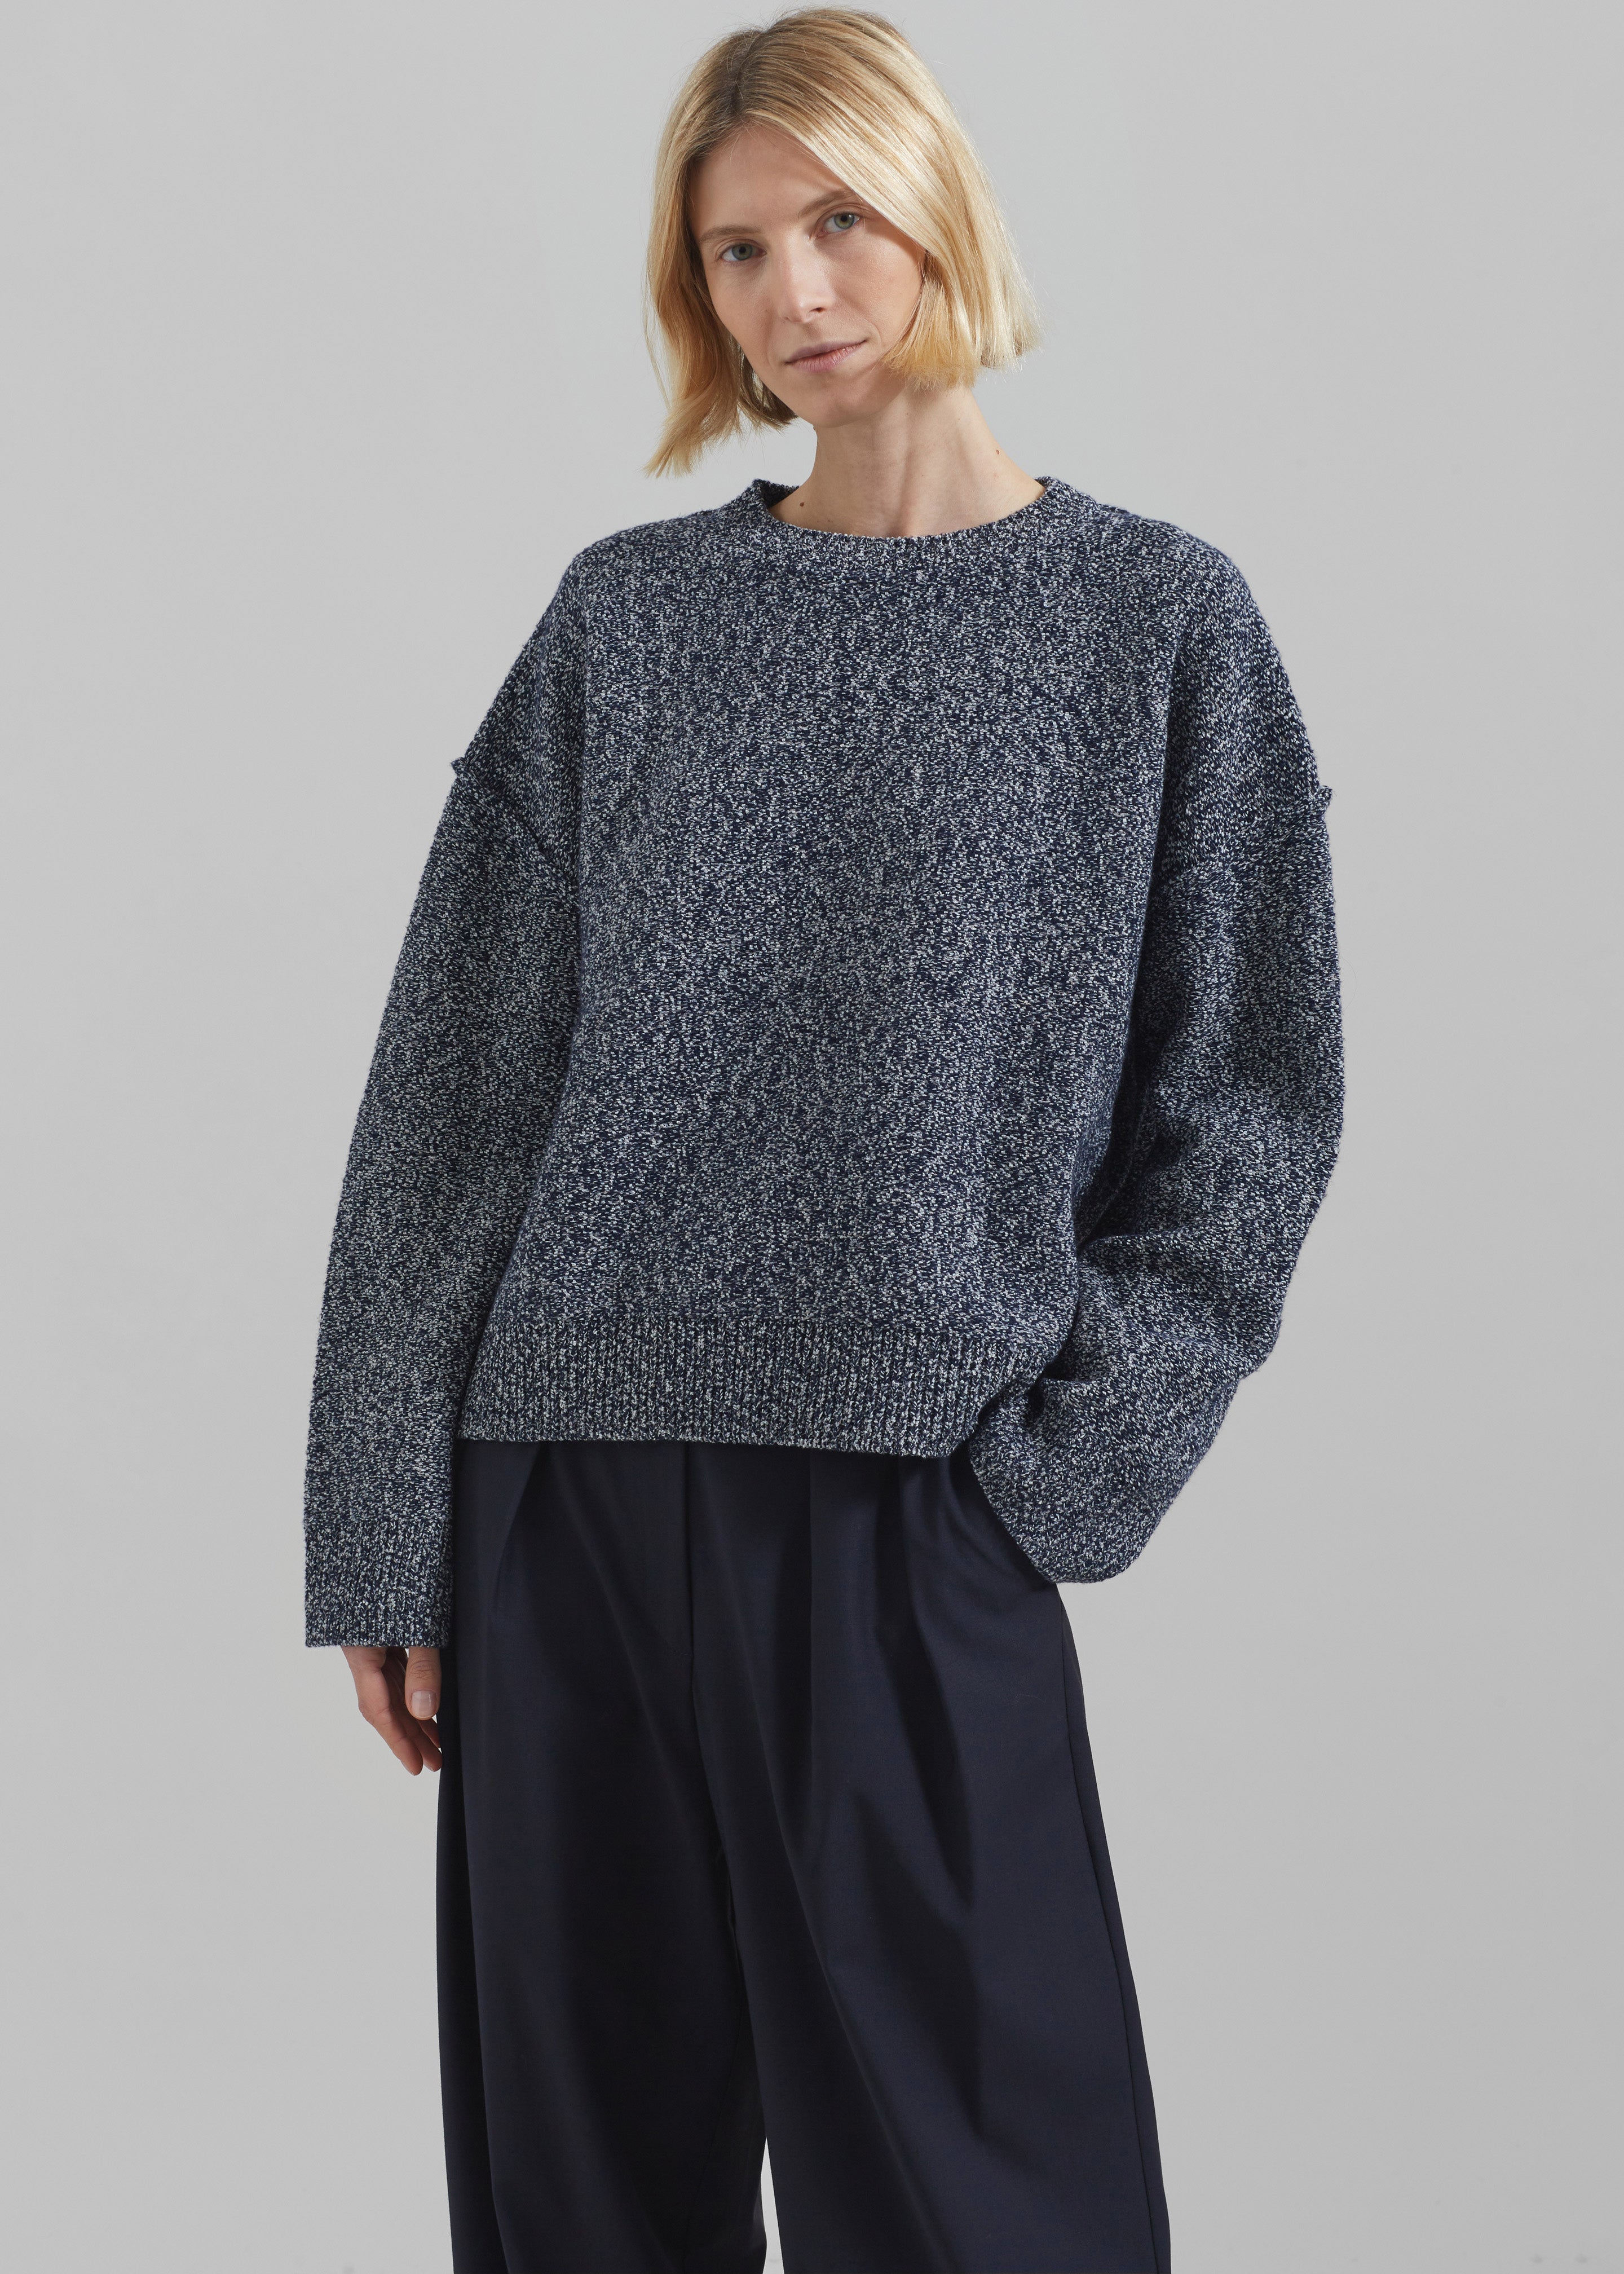 Proenza Schouler White Label Remy Sweater In Marled Knits - Dark Blue/Off White - 2